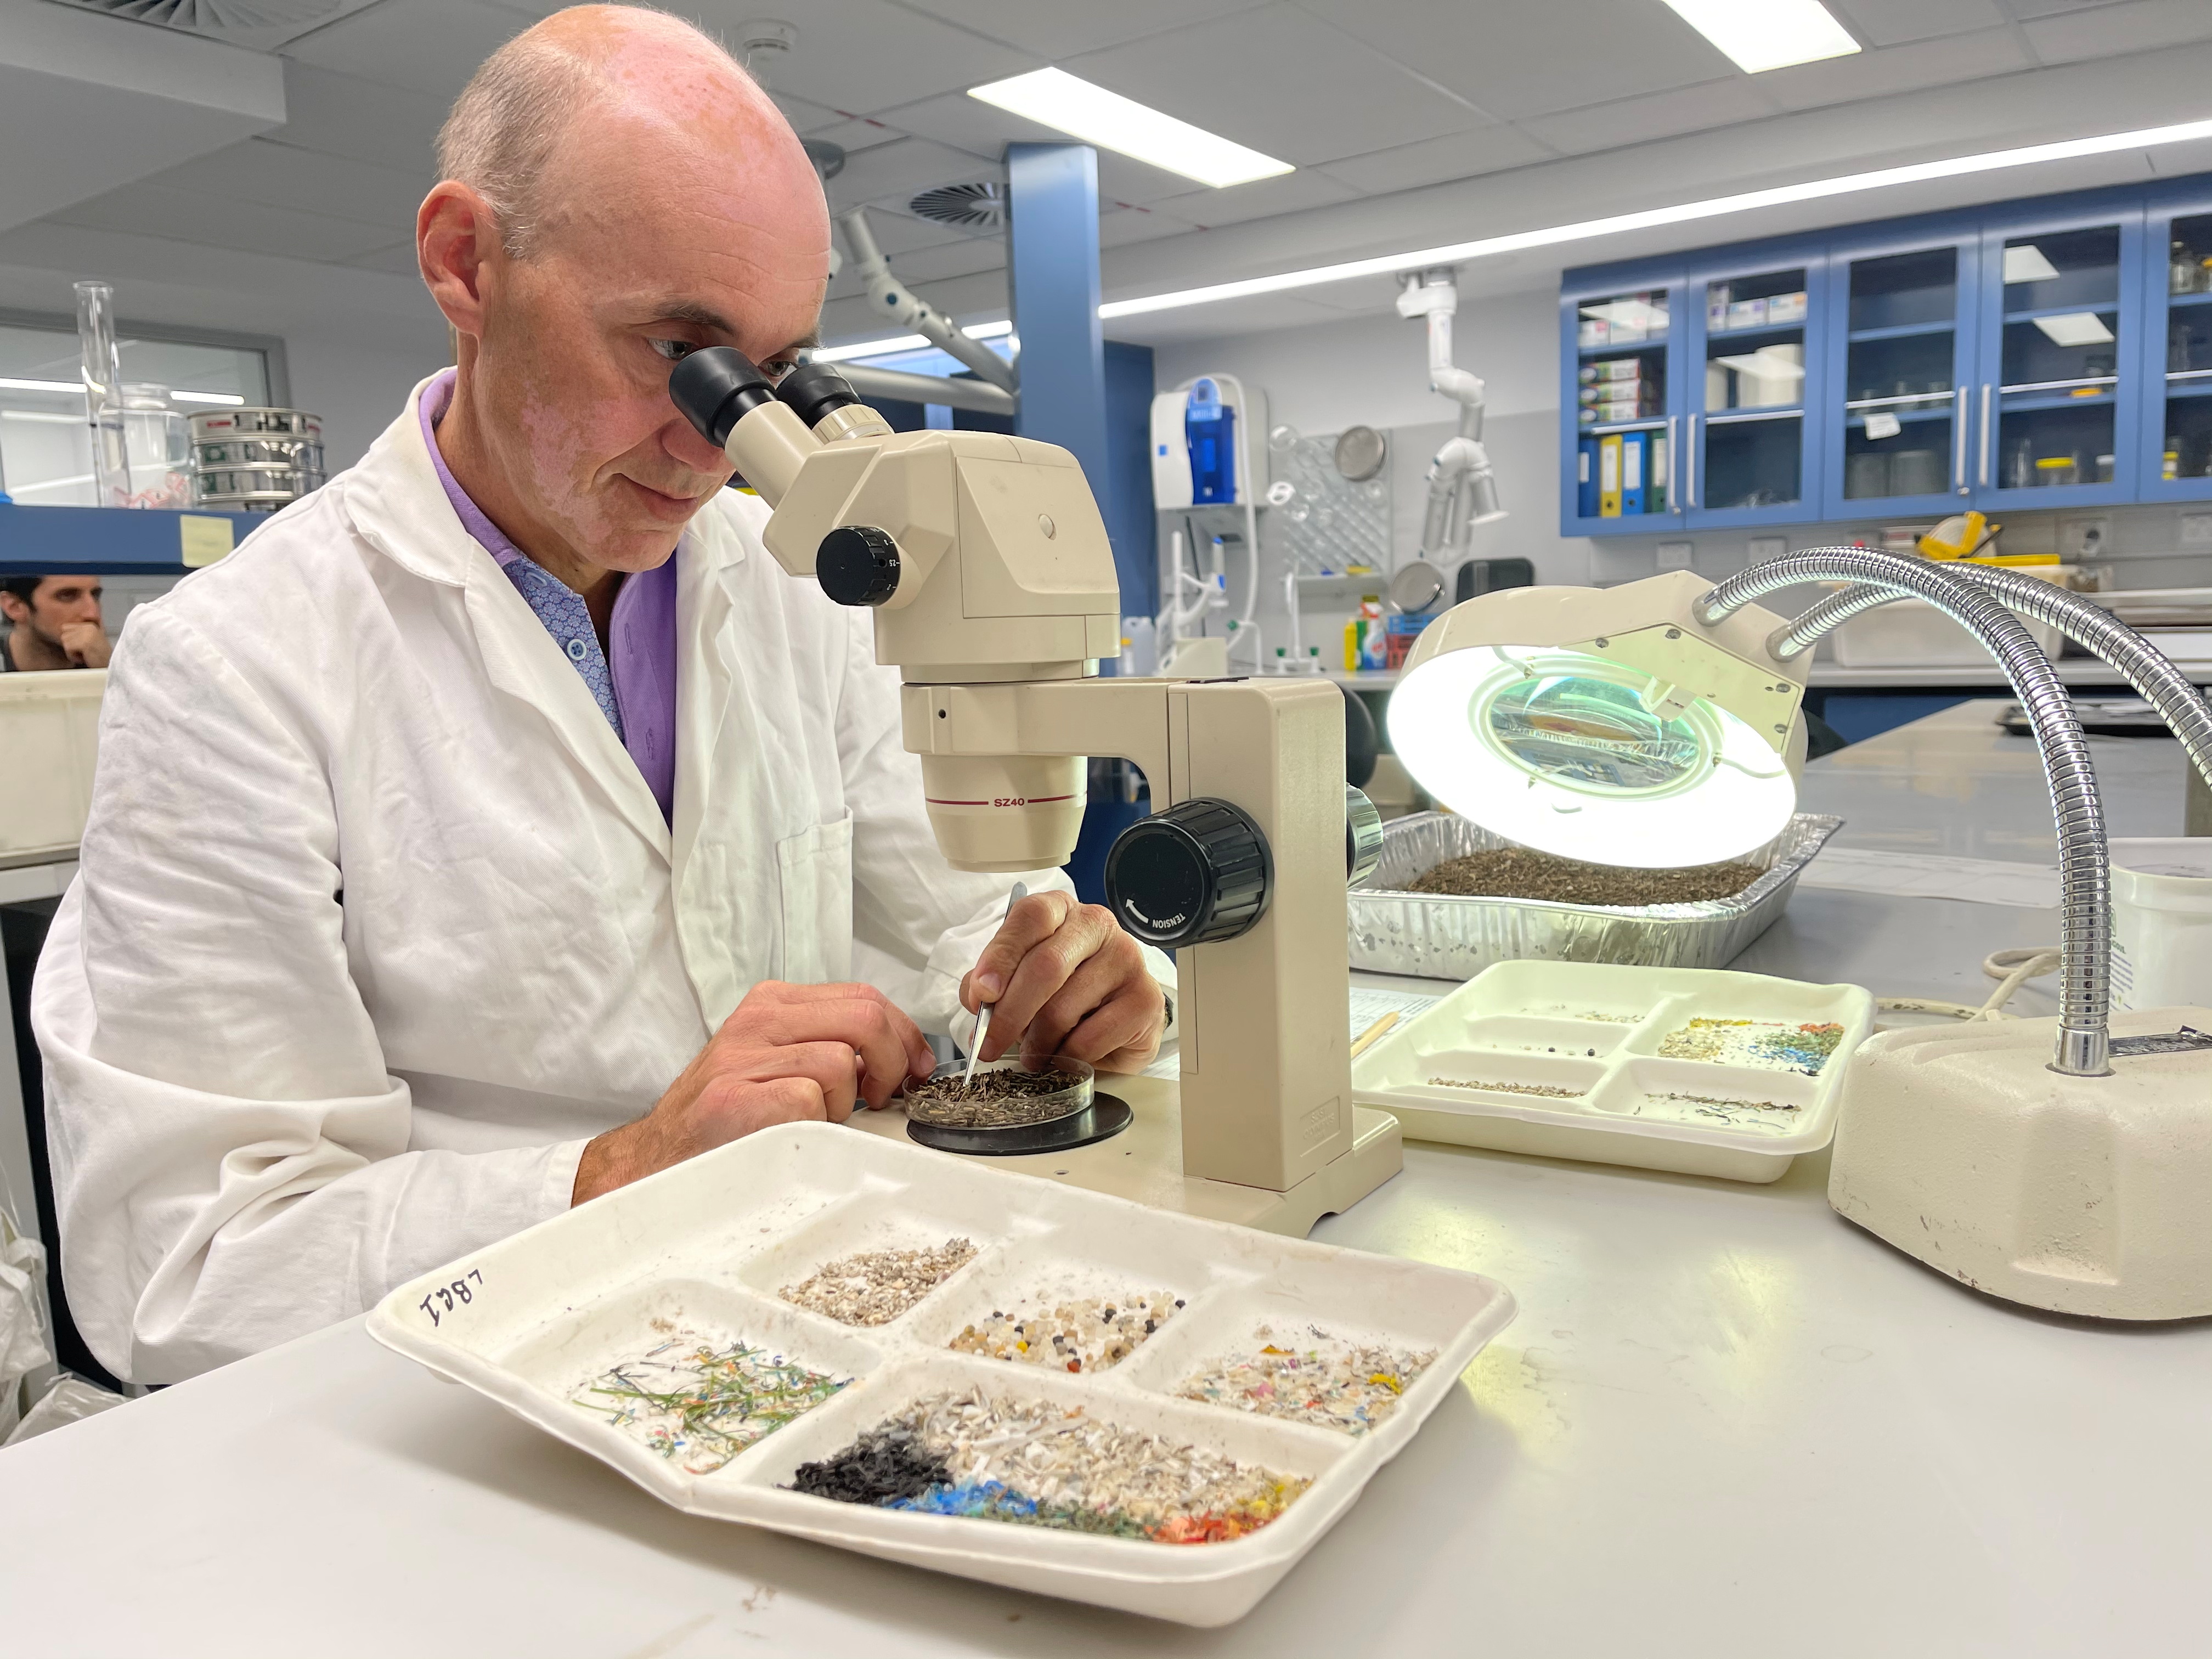 Australian Microplastic Assessment Project Research Director Dr Scott Wilson looks at microplastics through a microscope at Macquarie University in Sydney